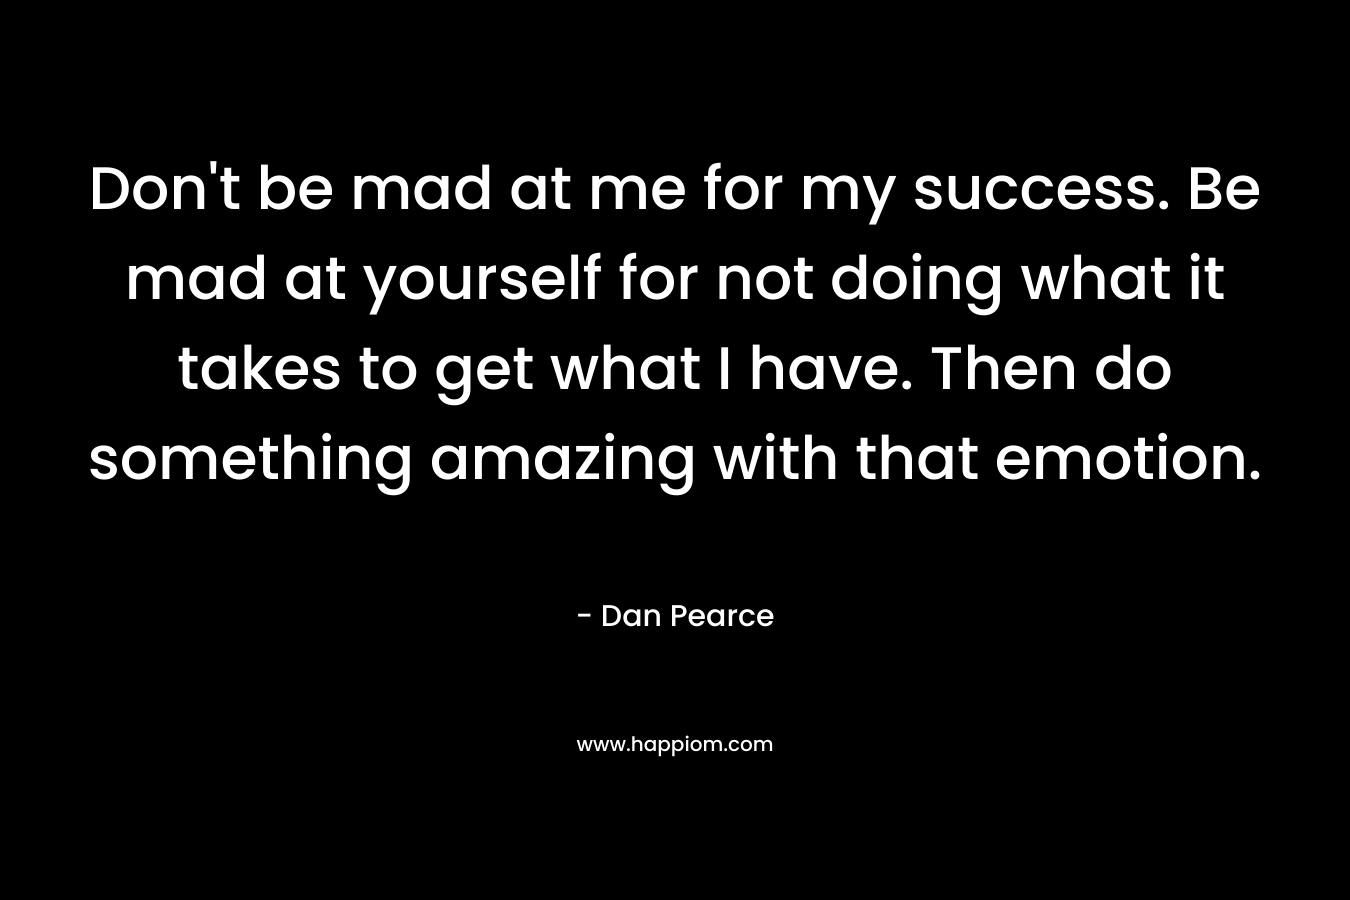 Don't be mad at me for my success. Be mad at yourself for not doing what it takes to get what I have. Then do something amazing with that emotion.